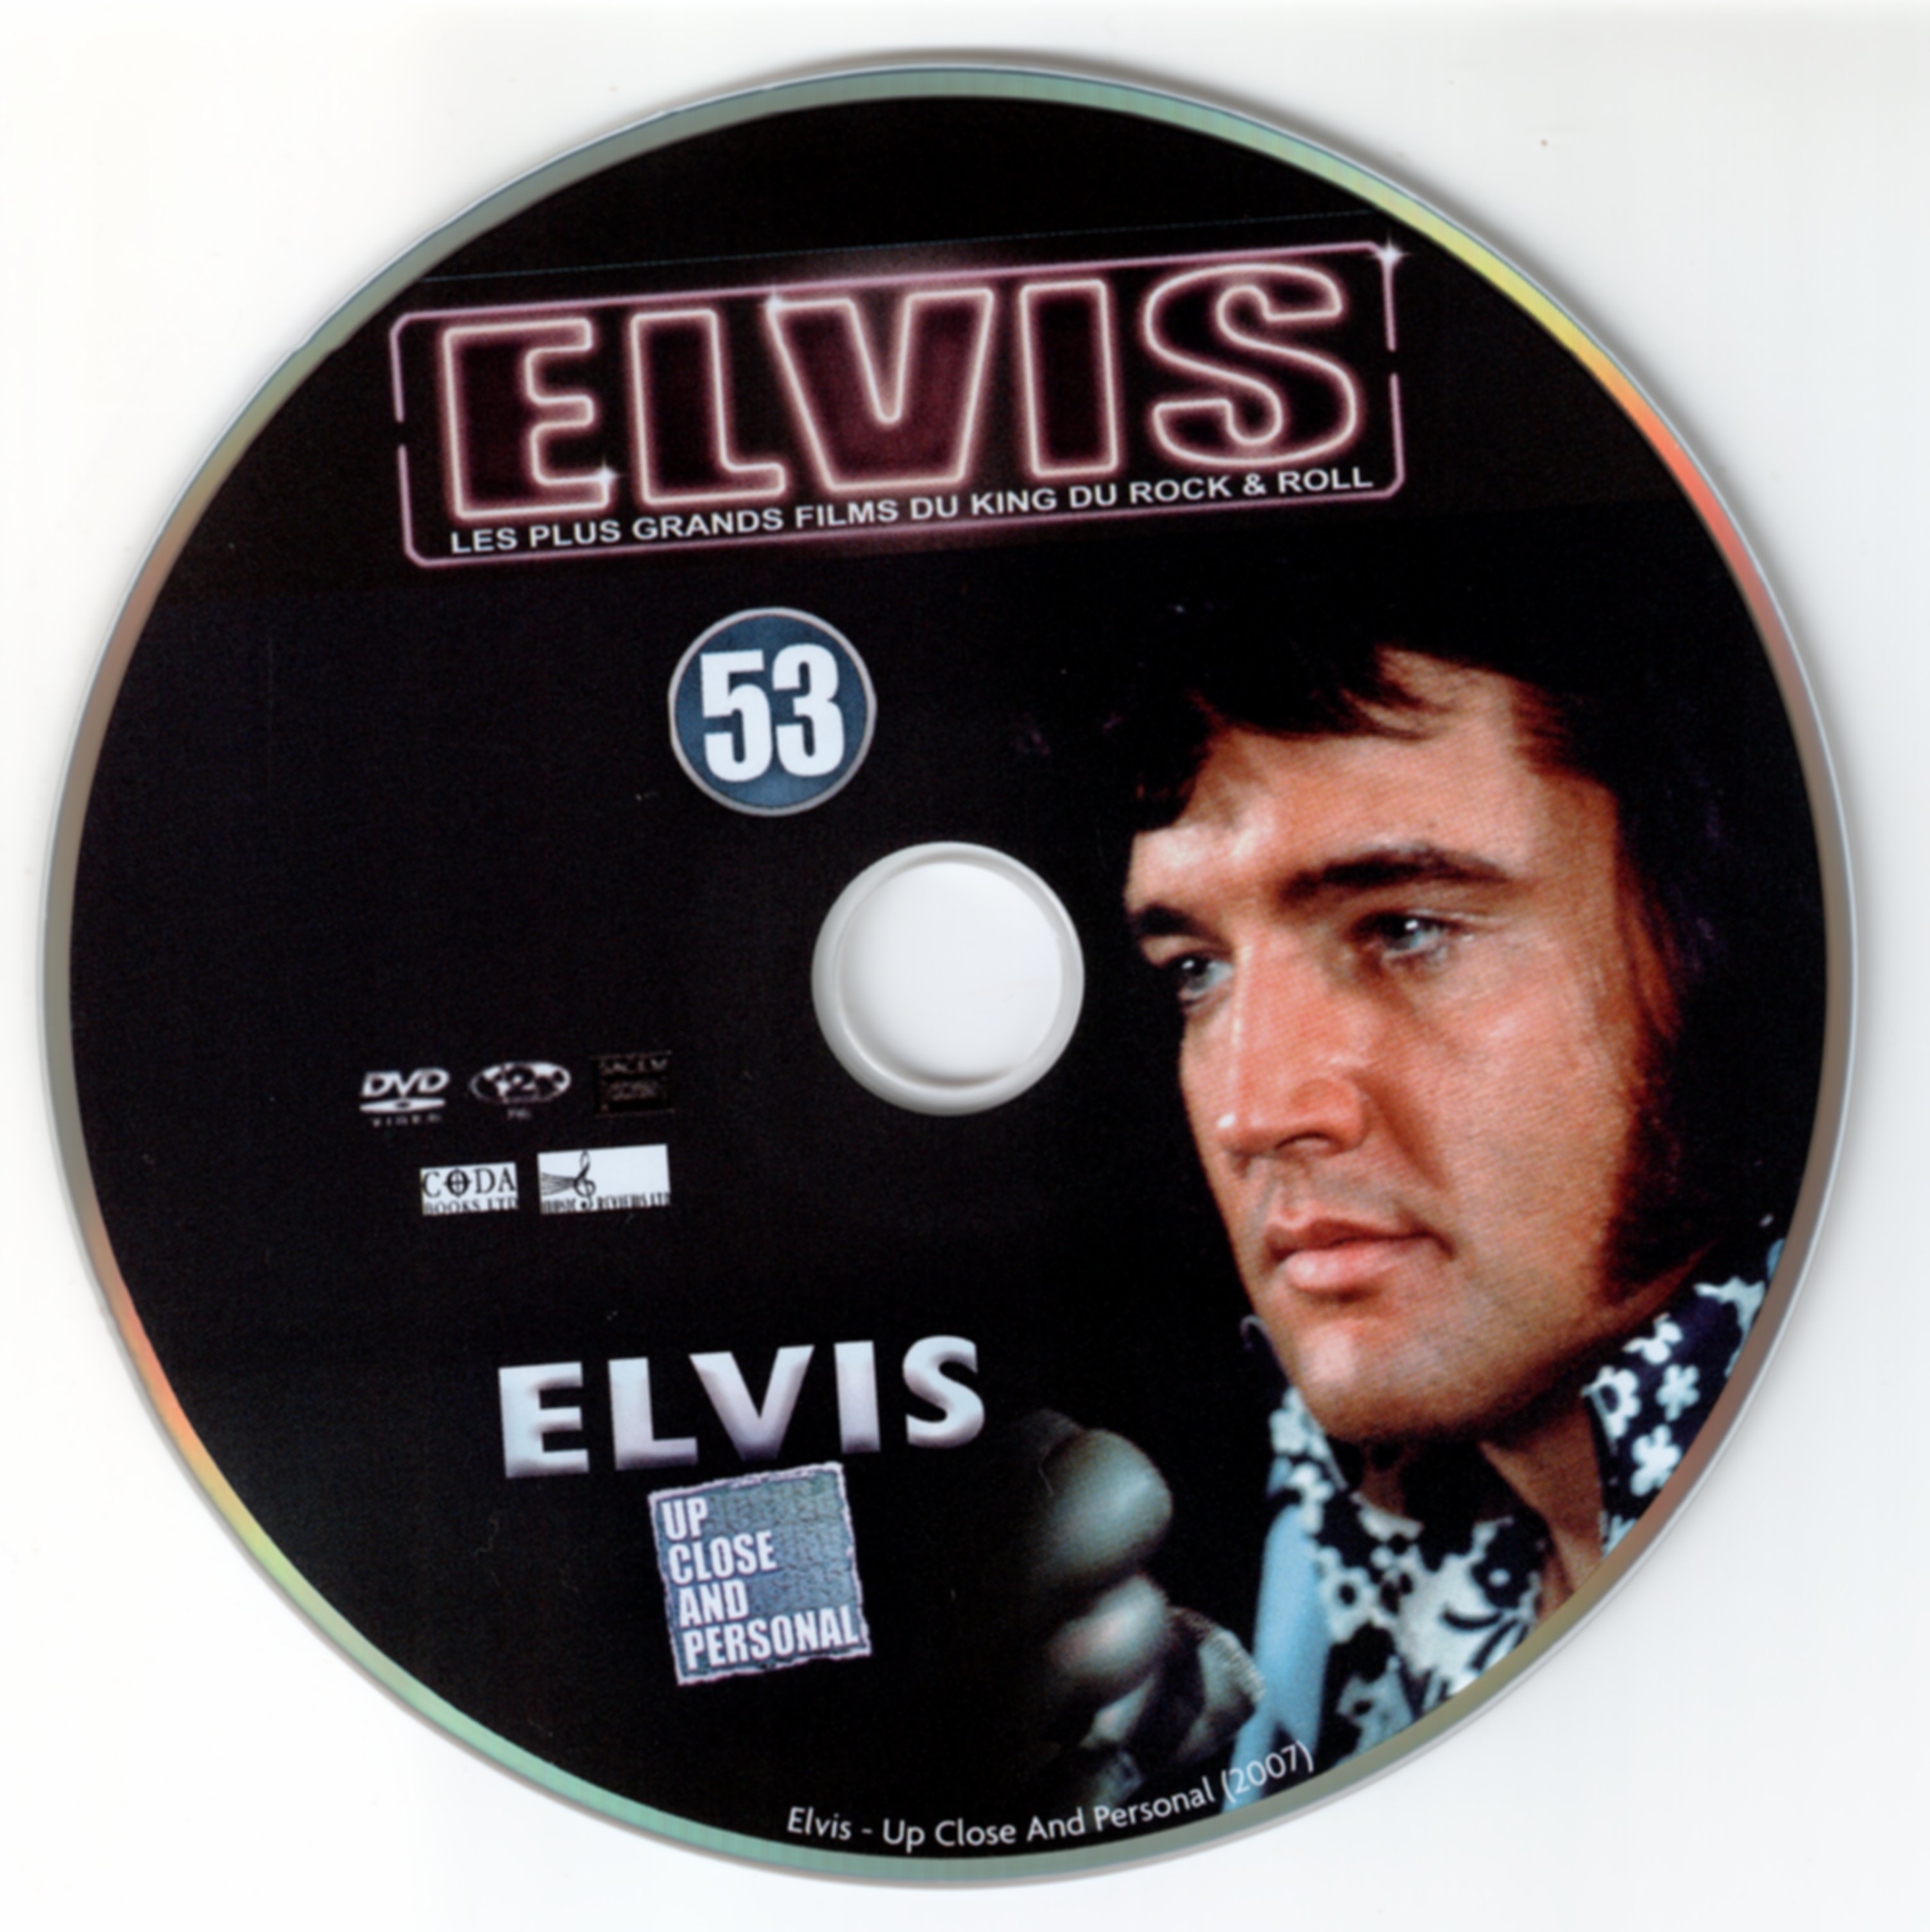 Elvis - Up close and personal